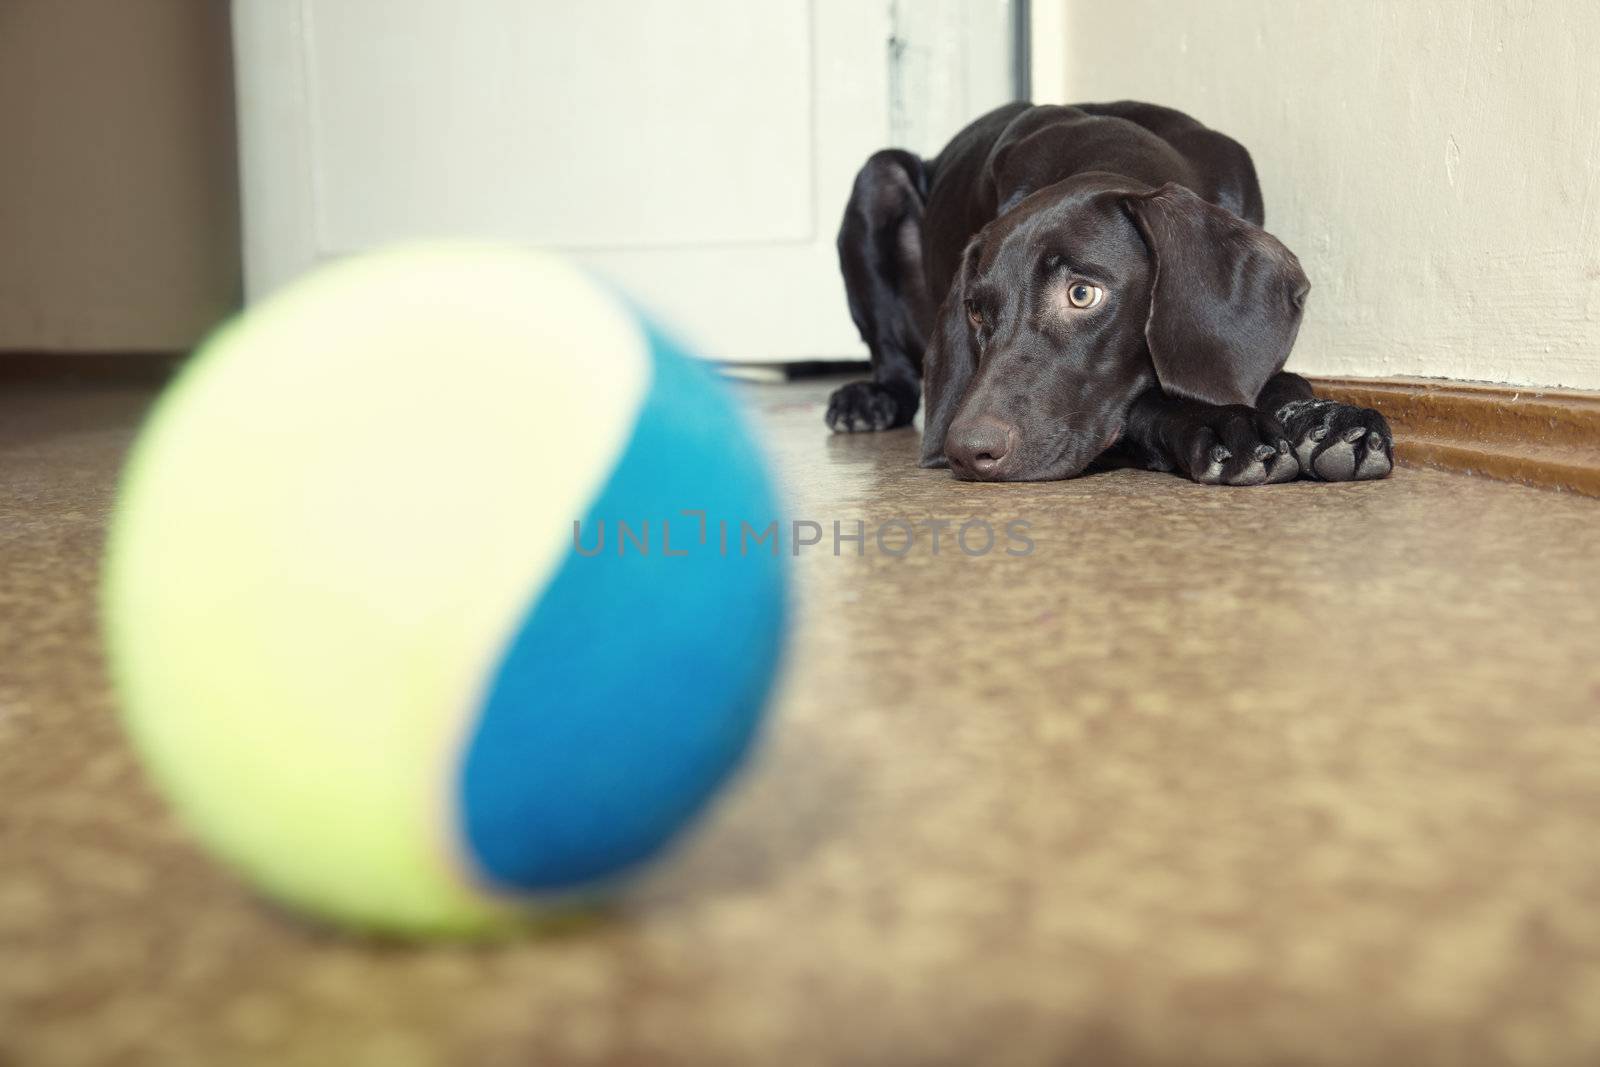 Sad dog laying at the defocused tennis ball. Natural light and colors